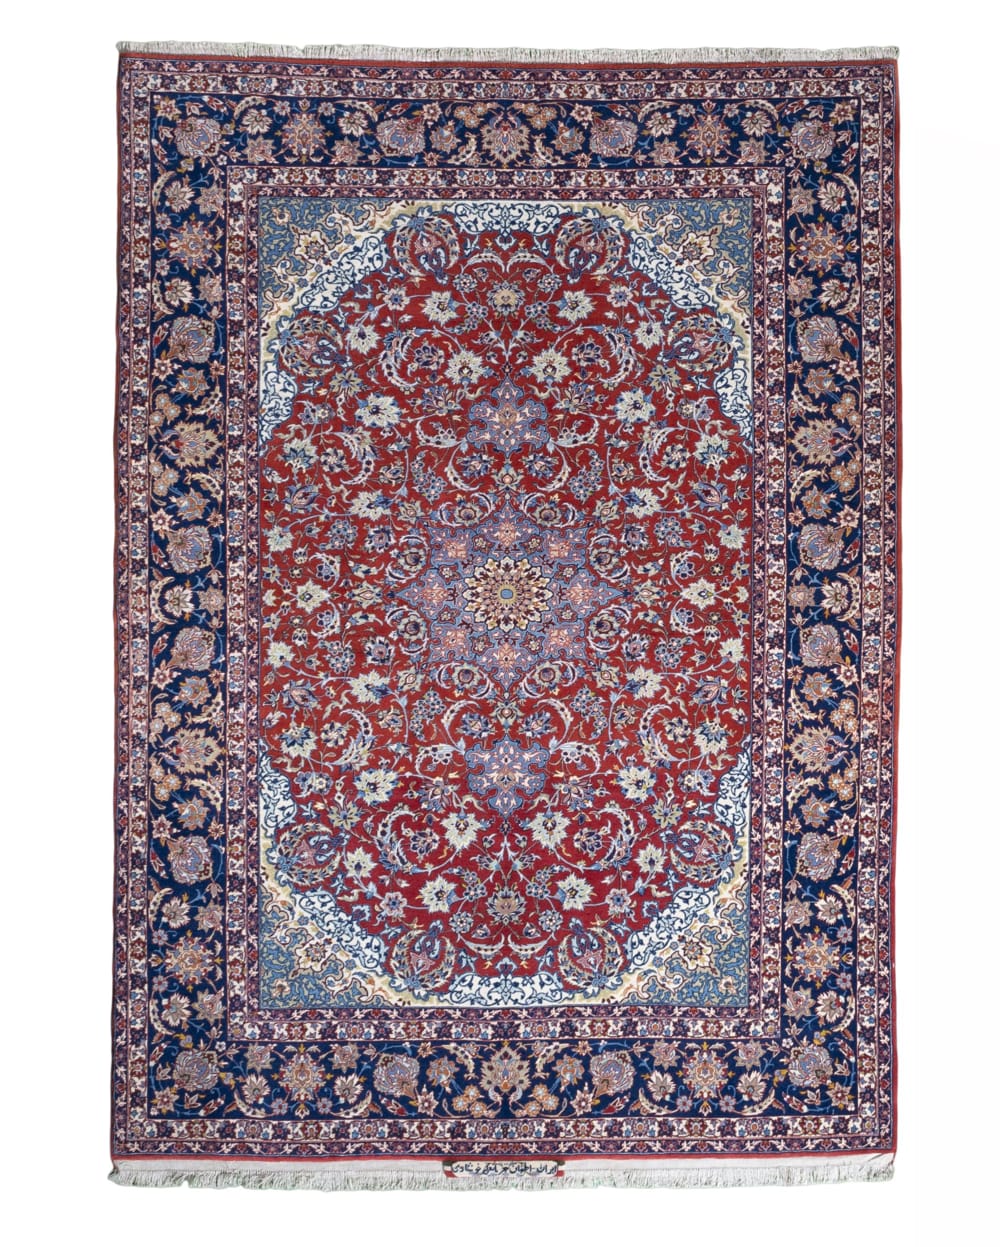 Rug# 45324 , Superfine signed Isfehan, fine wool and silk pile on full silk foundation, Shahabbassi flowers with medallion design, circa 1970, Persia, size 222x158 cm